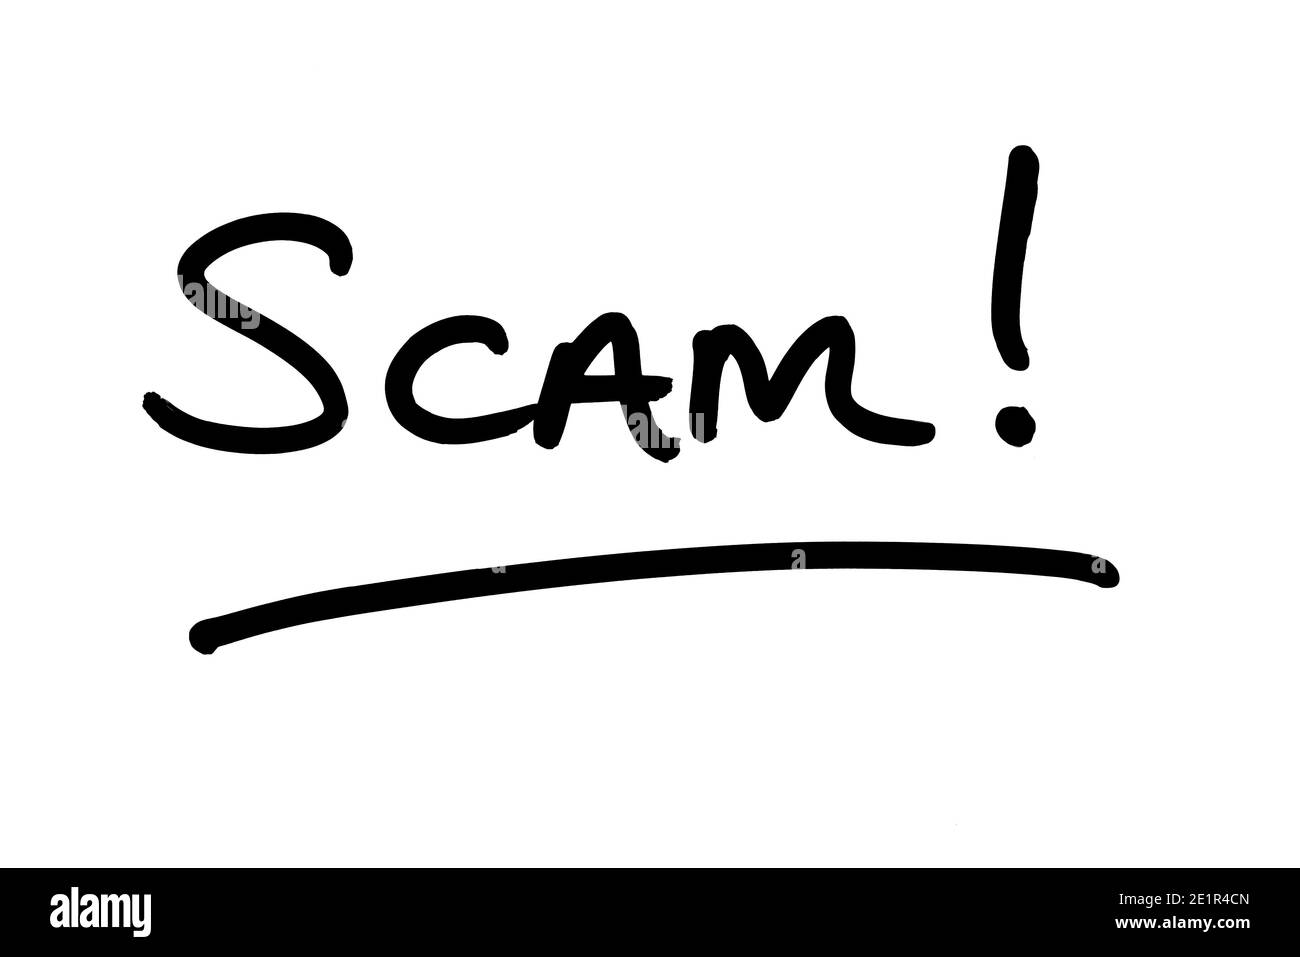 The word SCAM! handwritten on a white background. Stock Photo